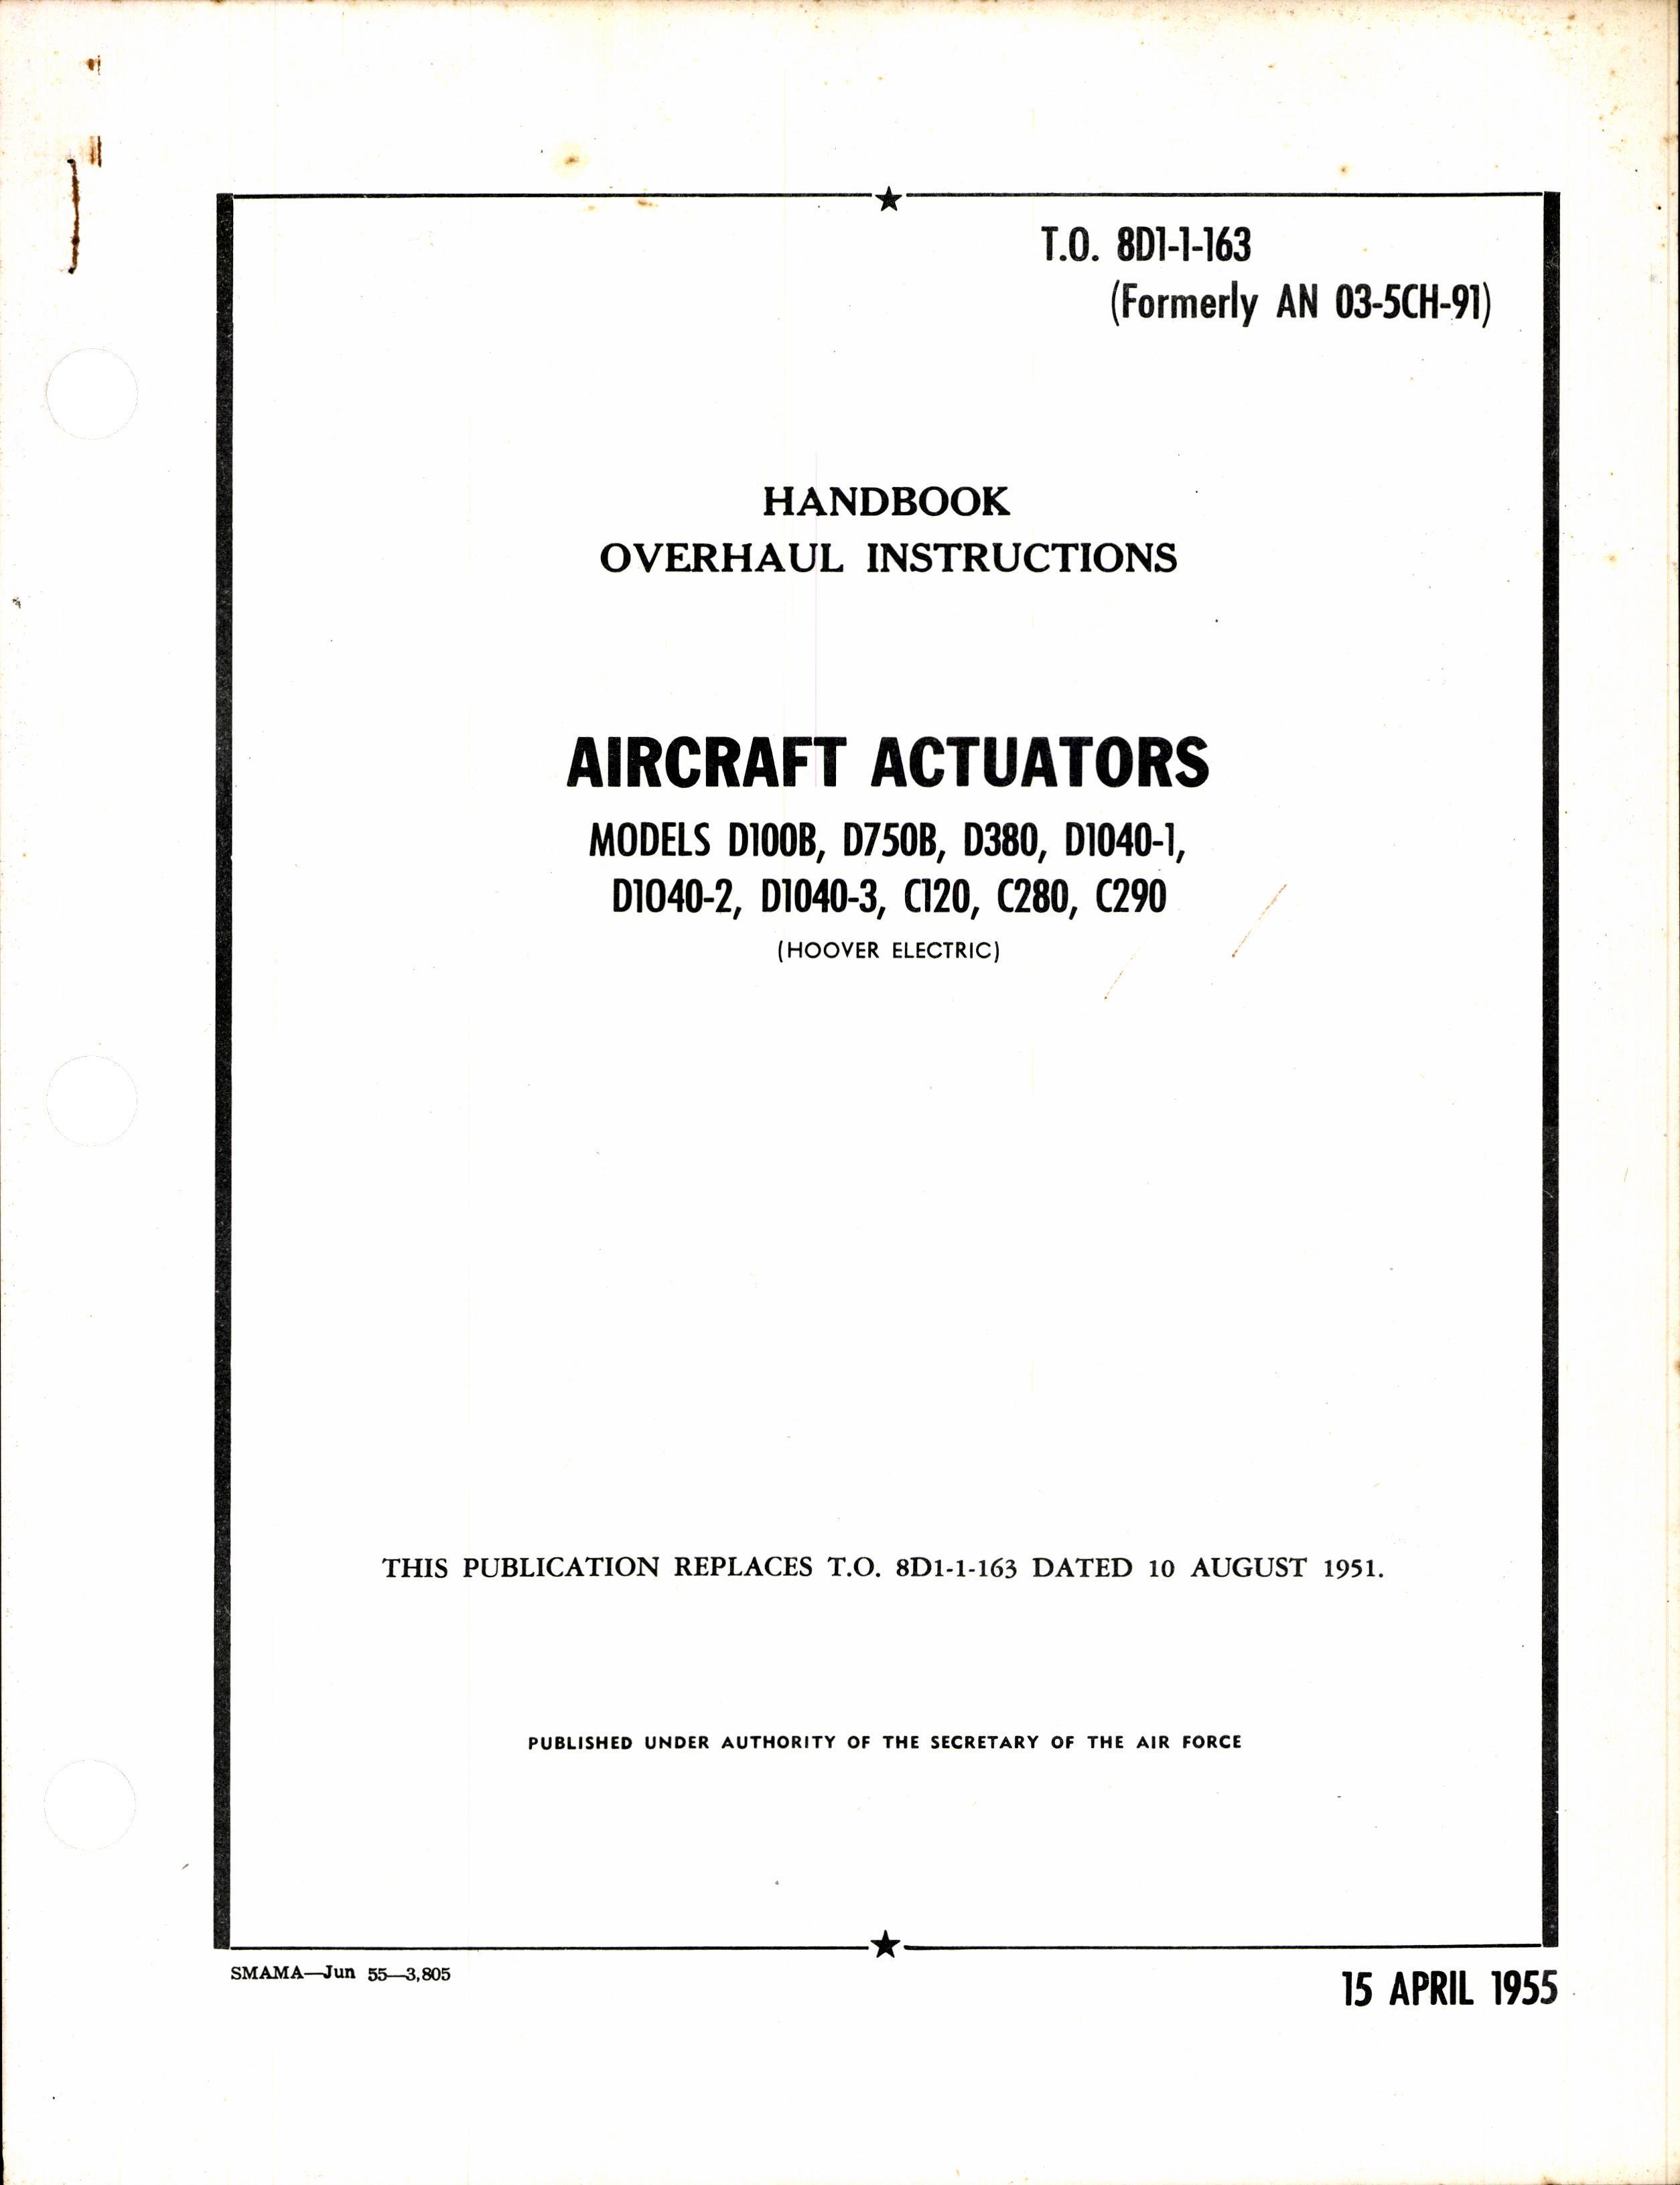 Sample page 1 from AirCorps Library document: Overhaul Instructions for Aircraft Actuators Models D100B, D750B, D380, D1040-1, D1040-2, D1040-3, C120, C280, and C290